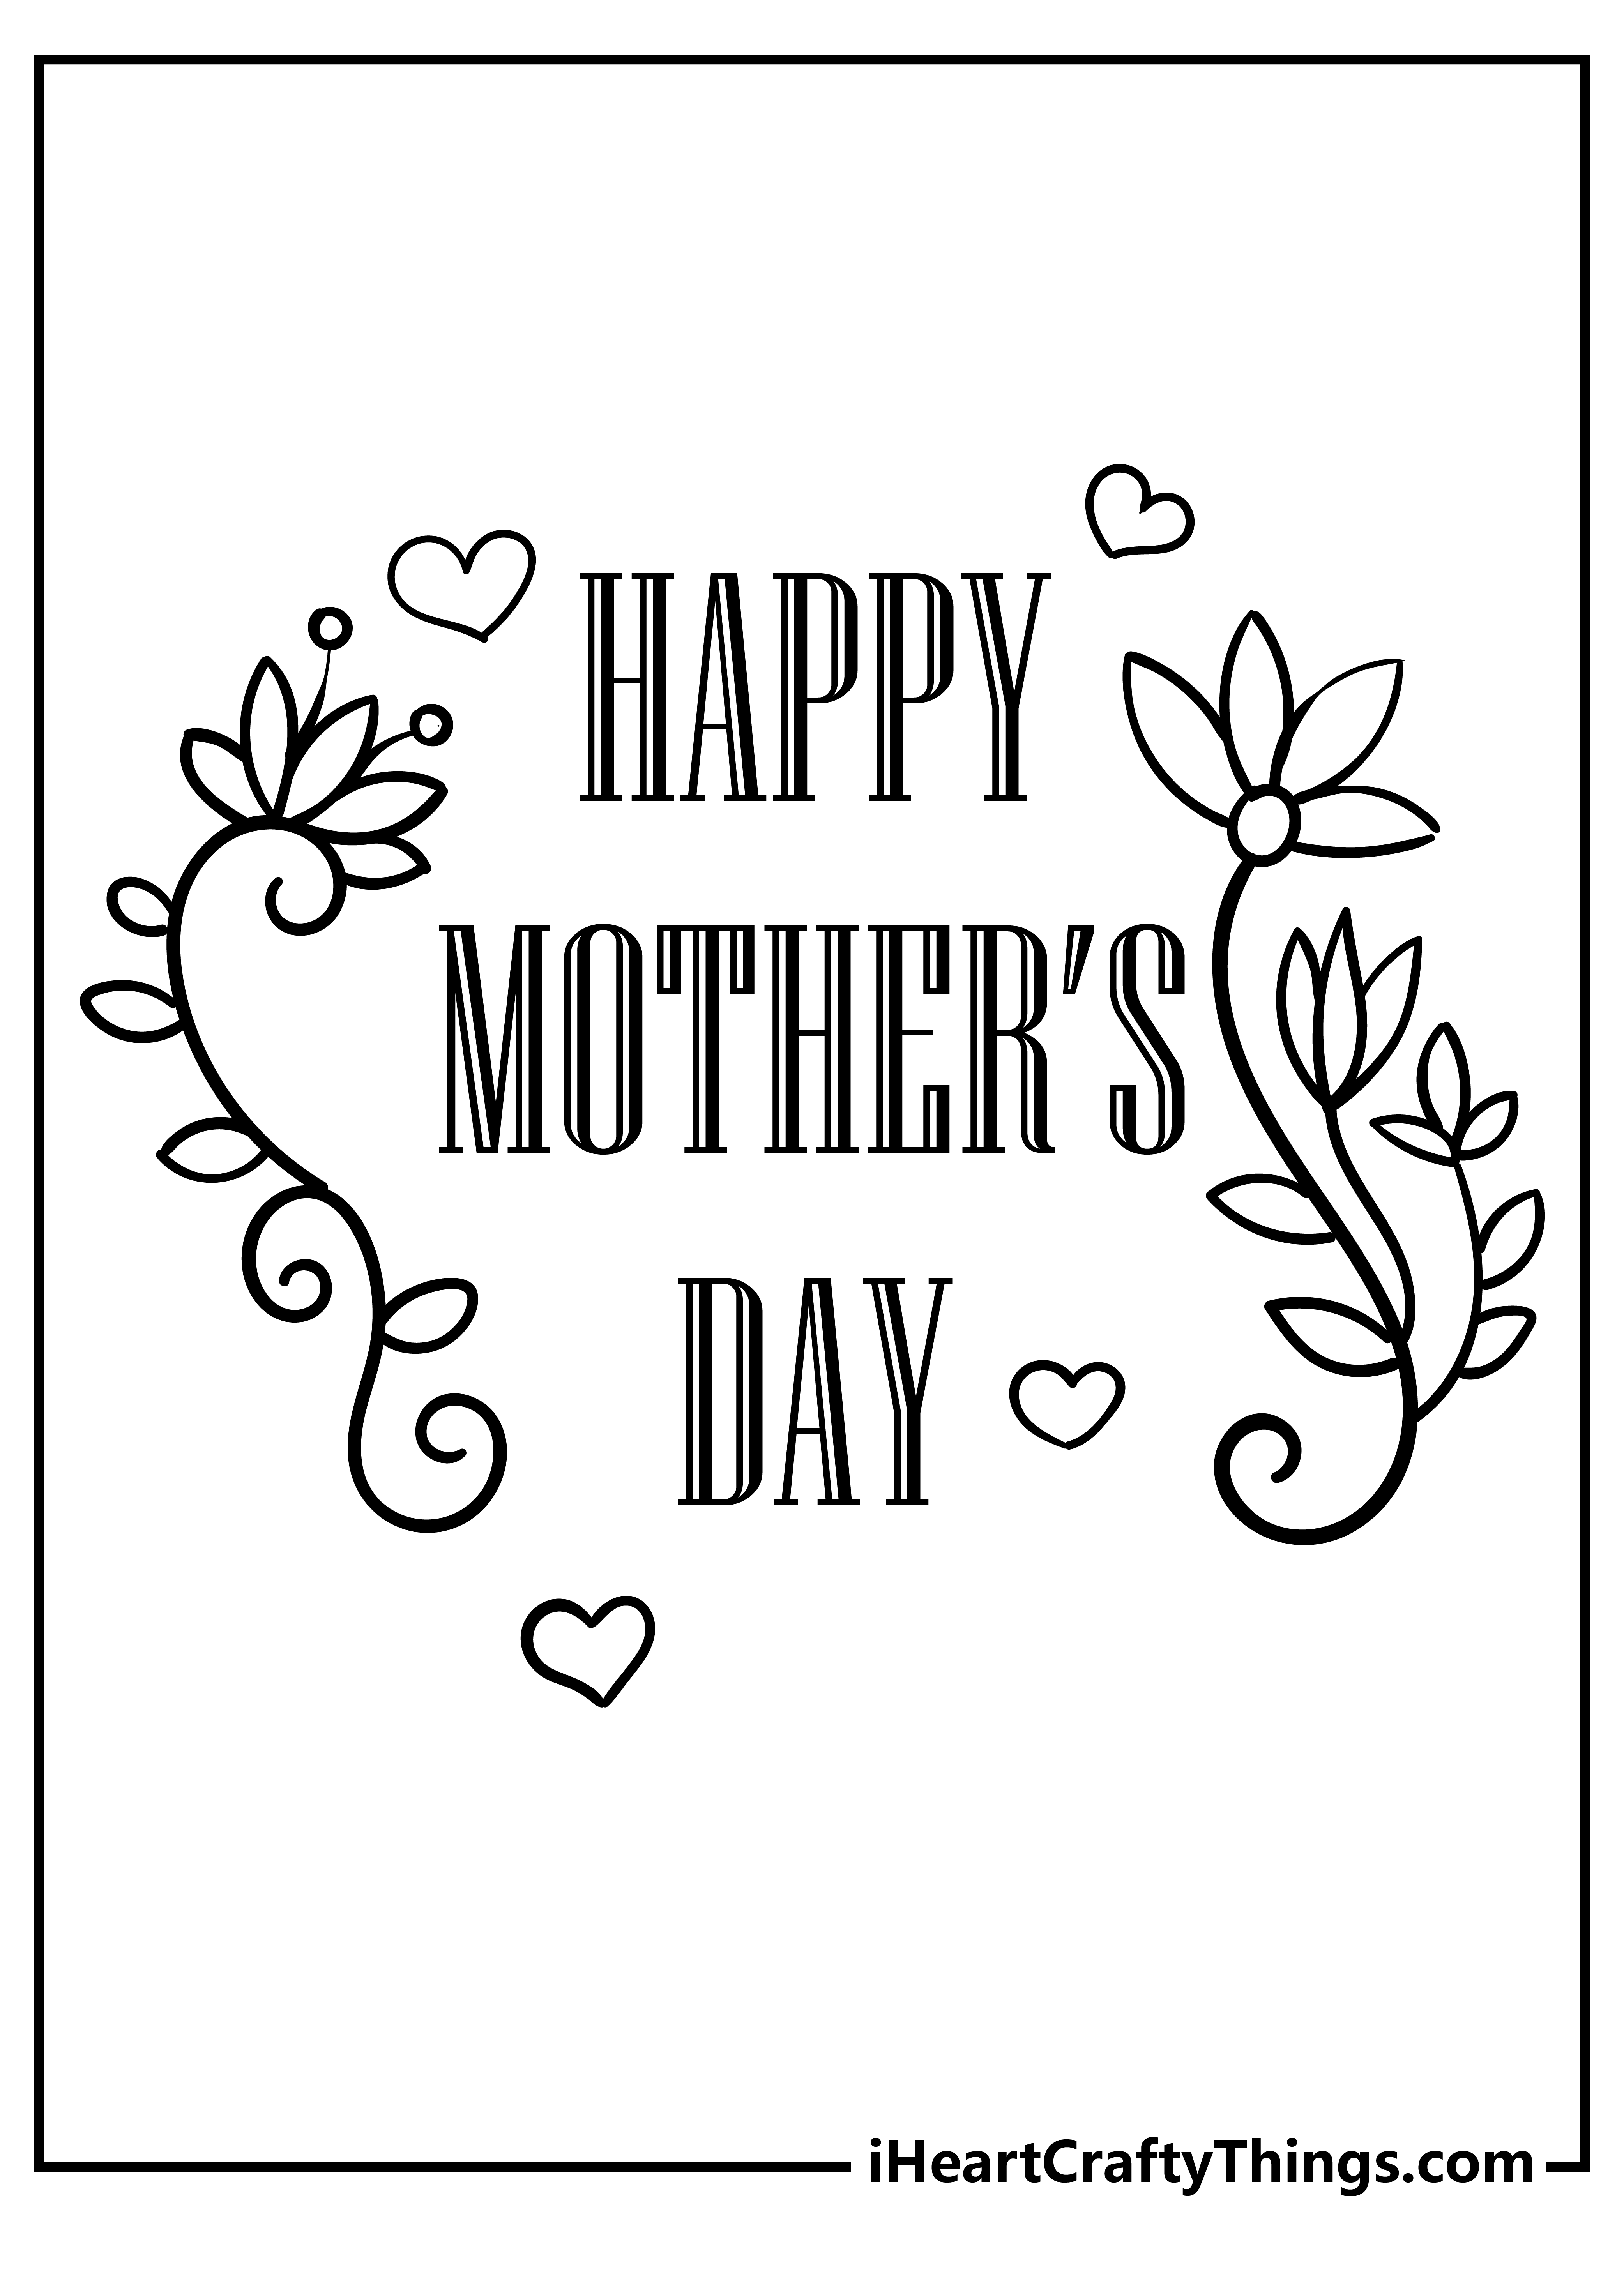 Mother’s Day Coloring Pages for adults free printable